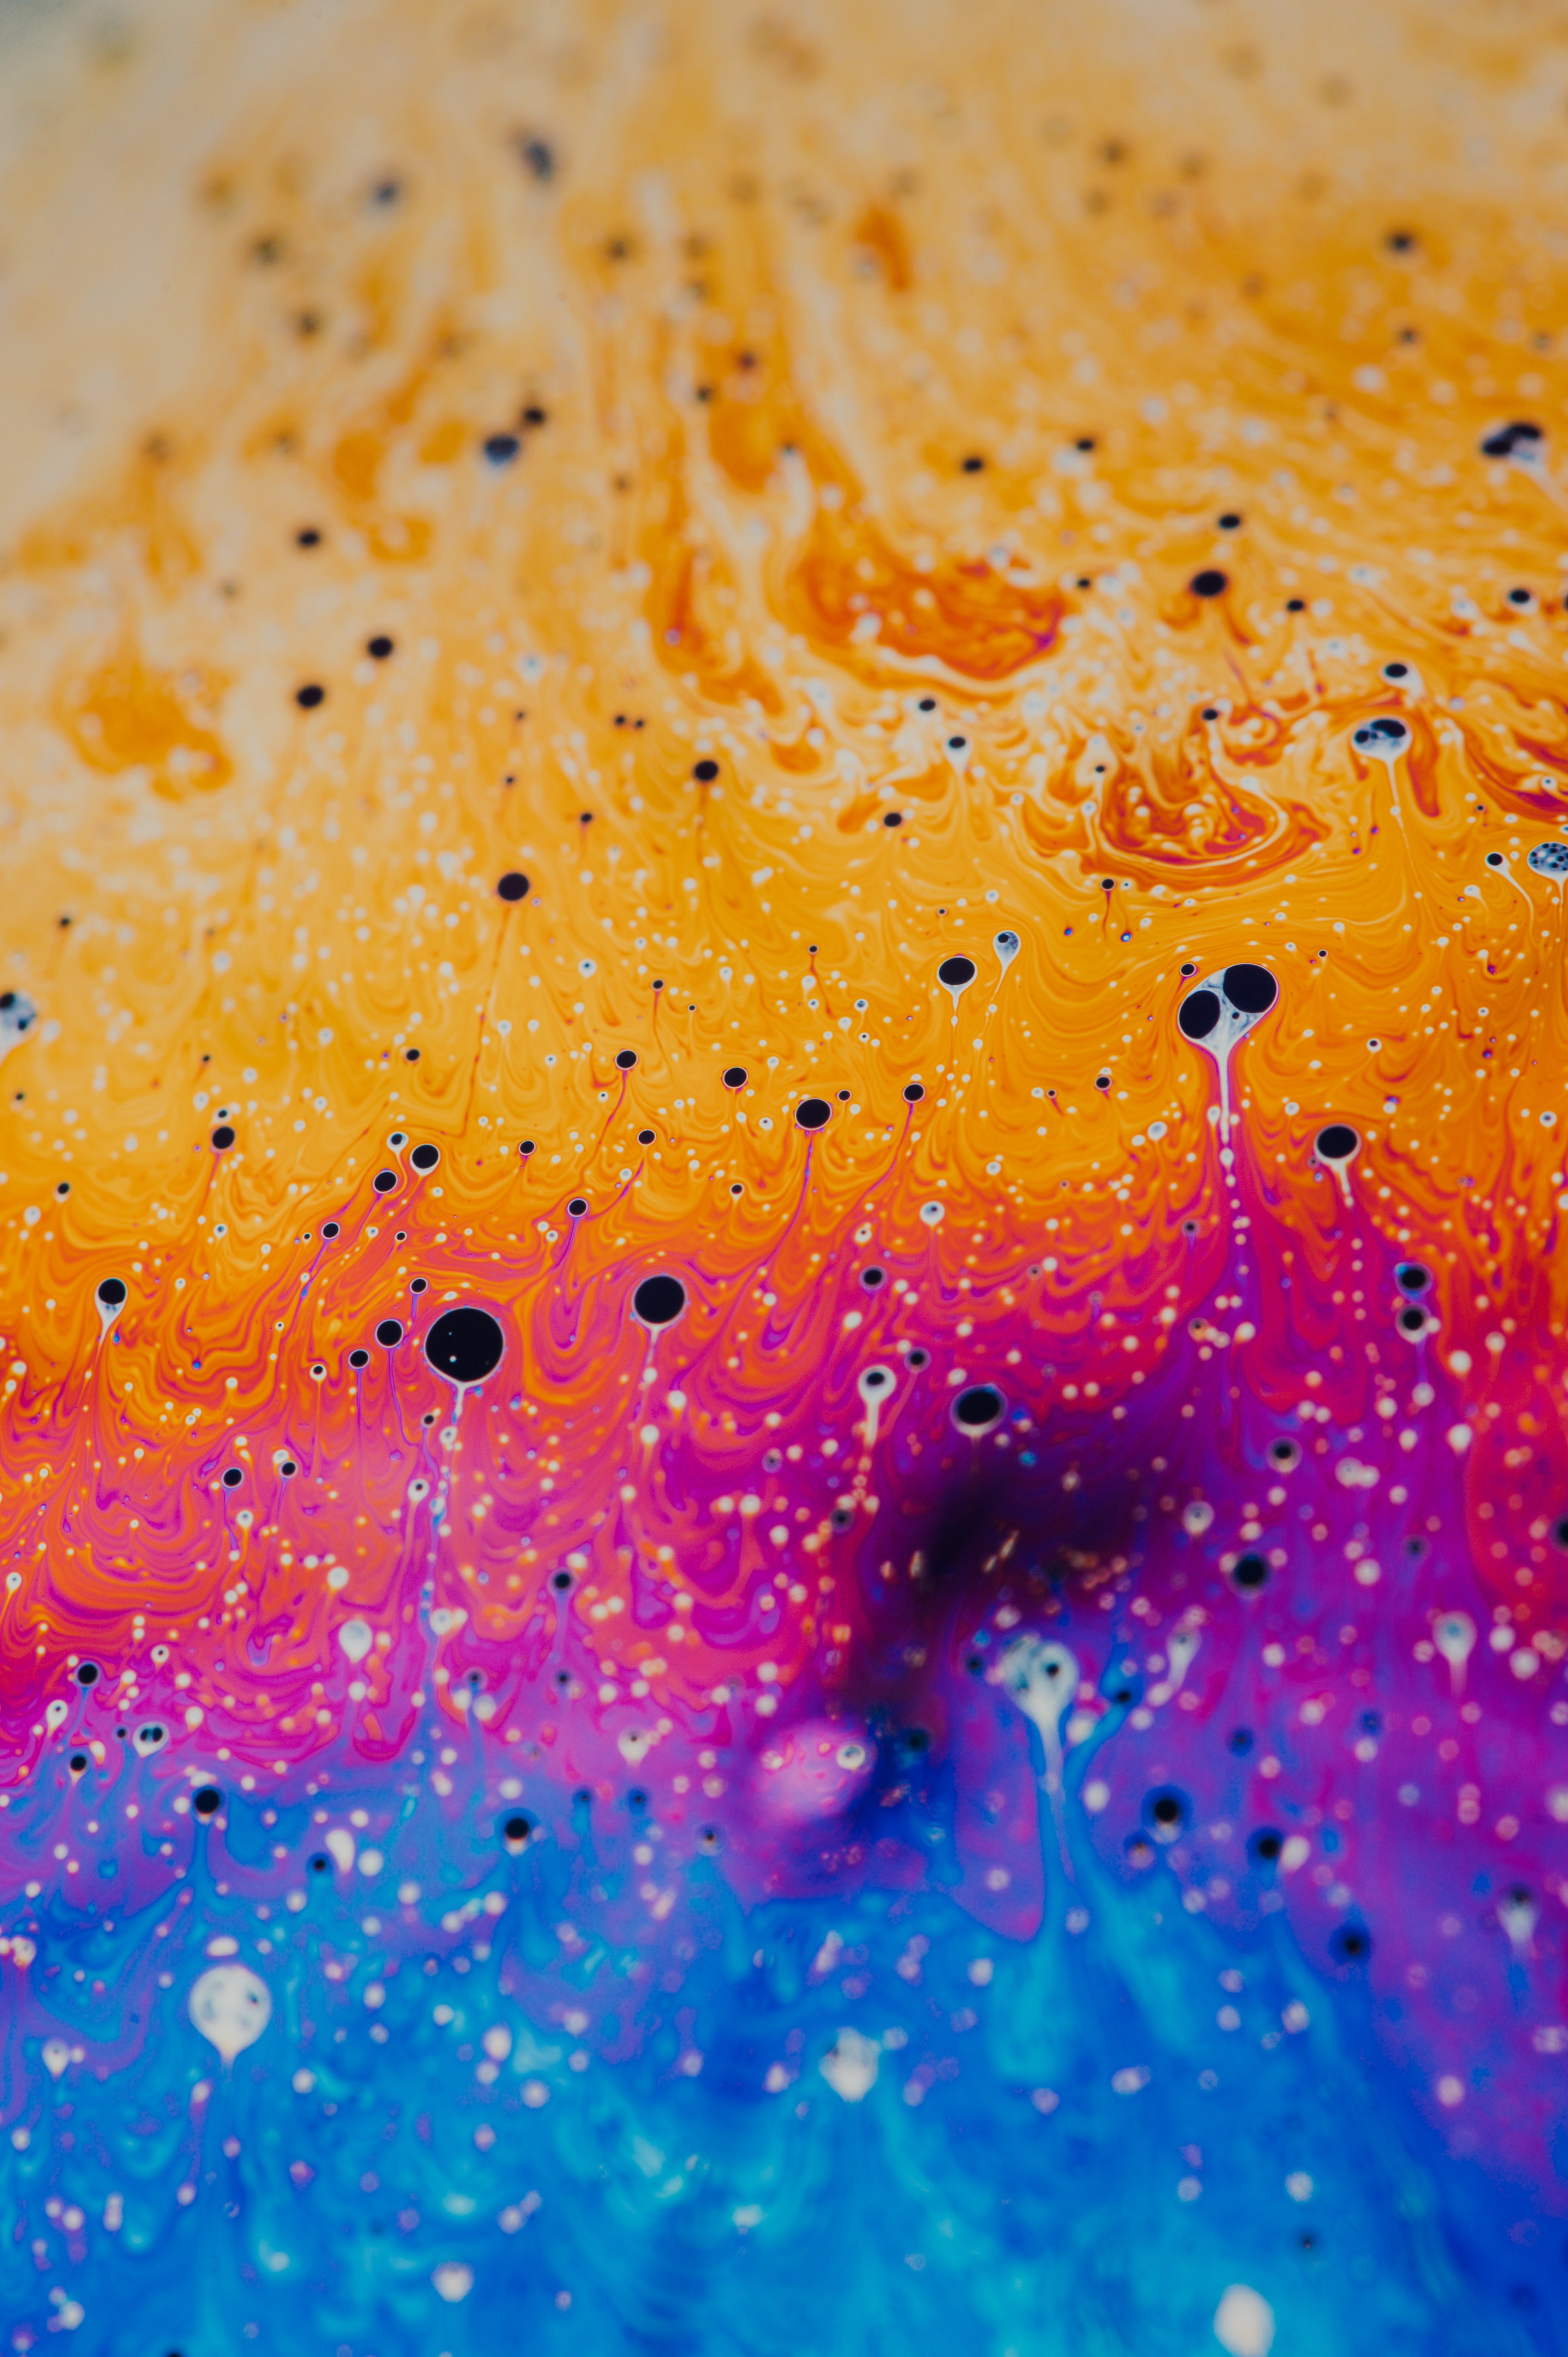 Horizontal Wallpaper stains, multicolored, abstract, motley, paint, liquid, spots